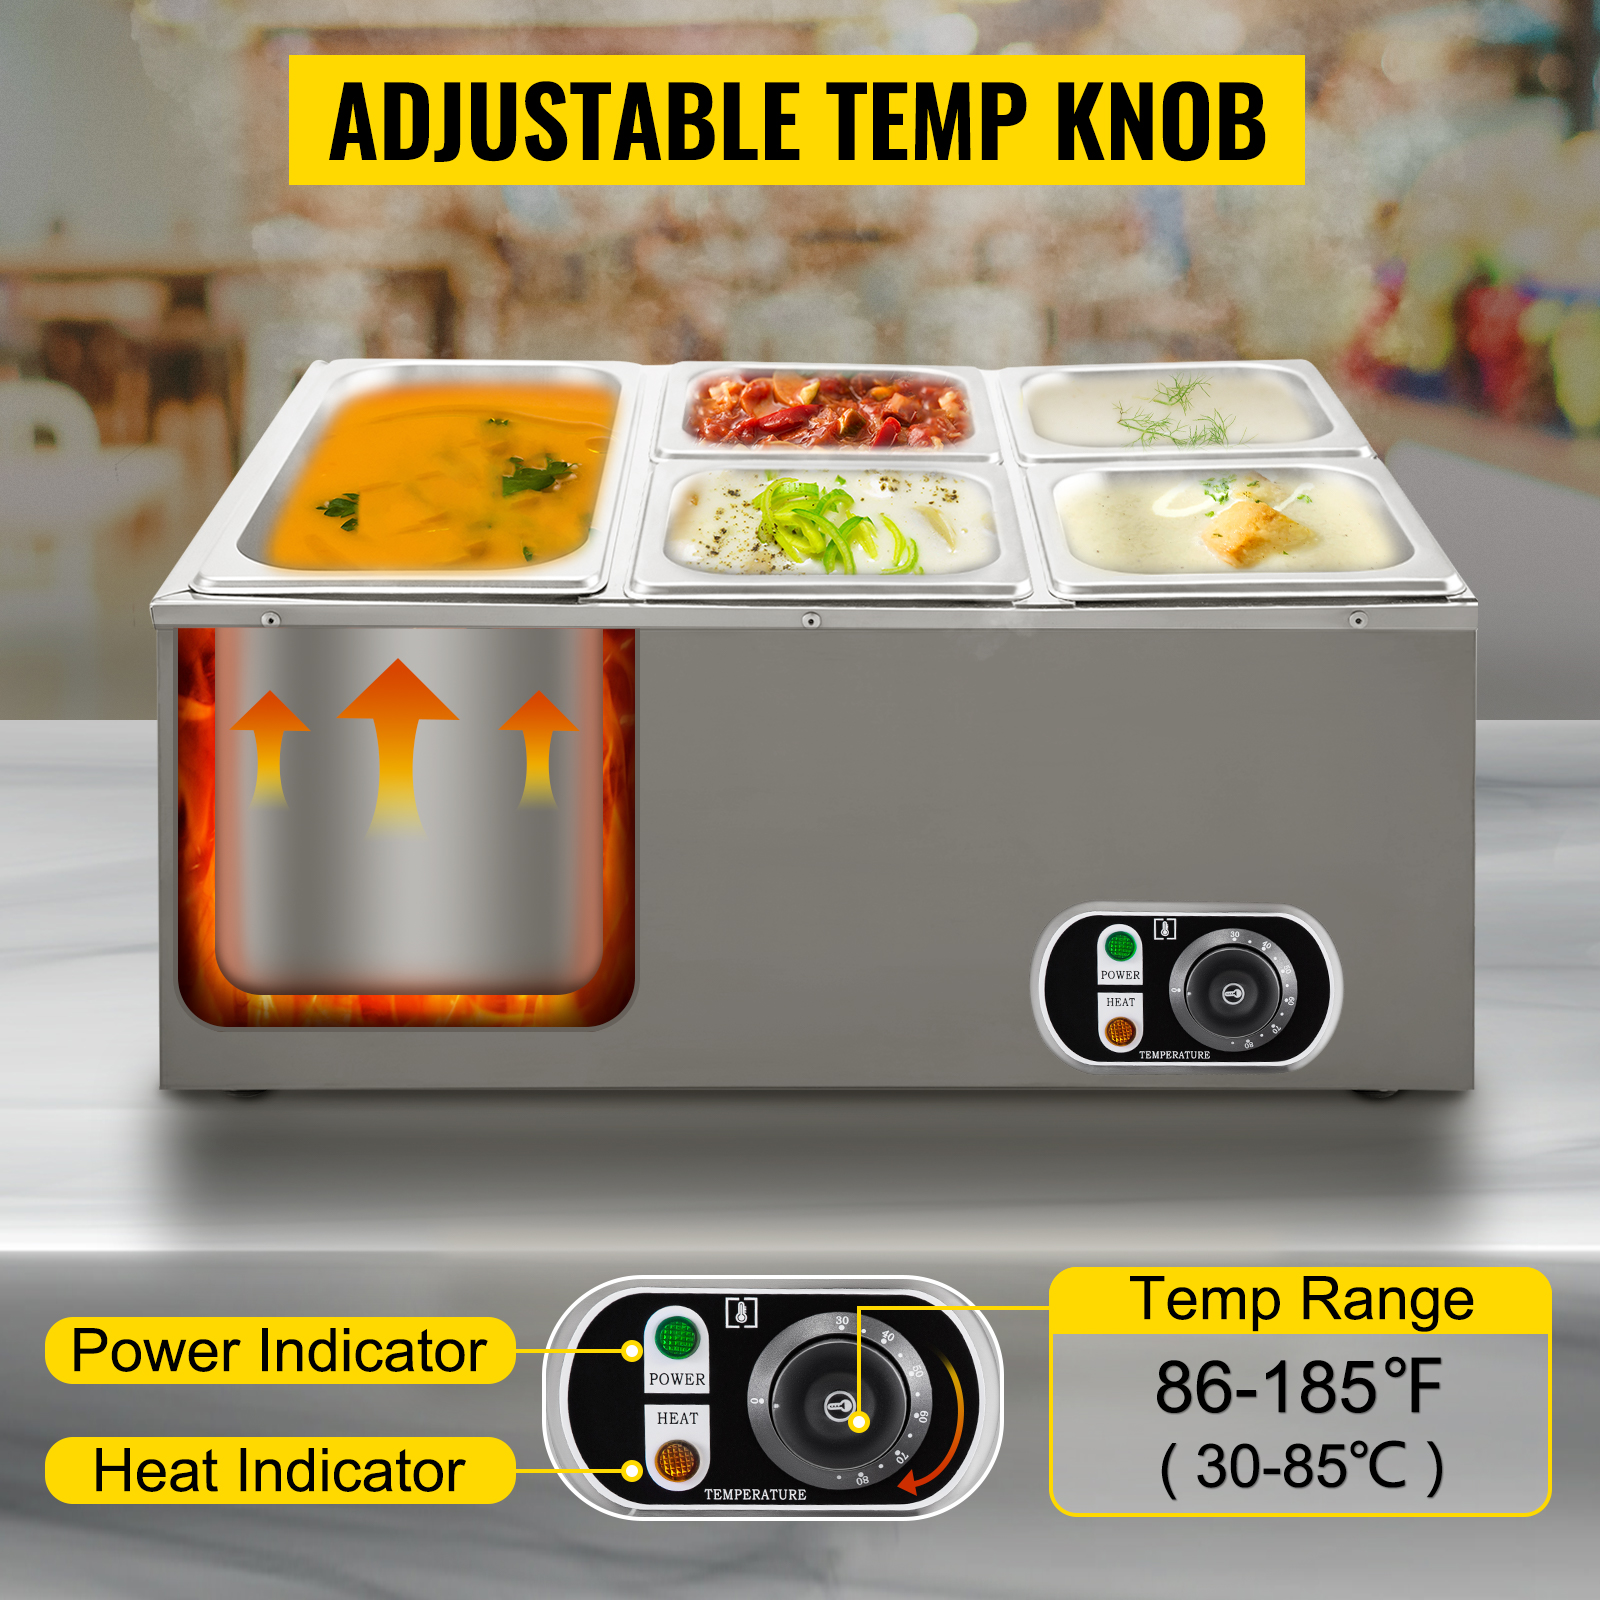 Stainless Steel Electric Food Warmer, Capacity: 4 To 25 Ltr